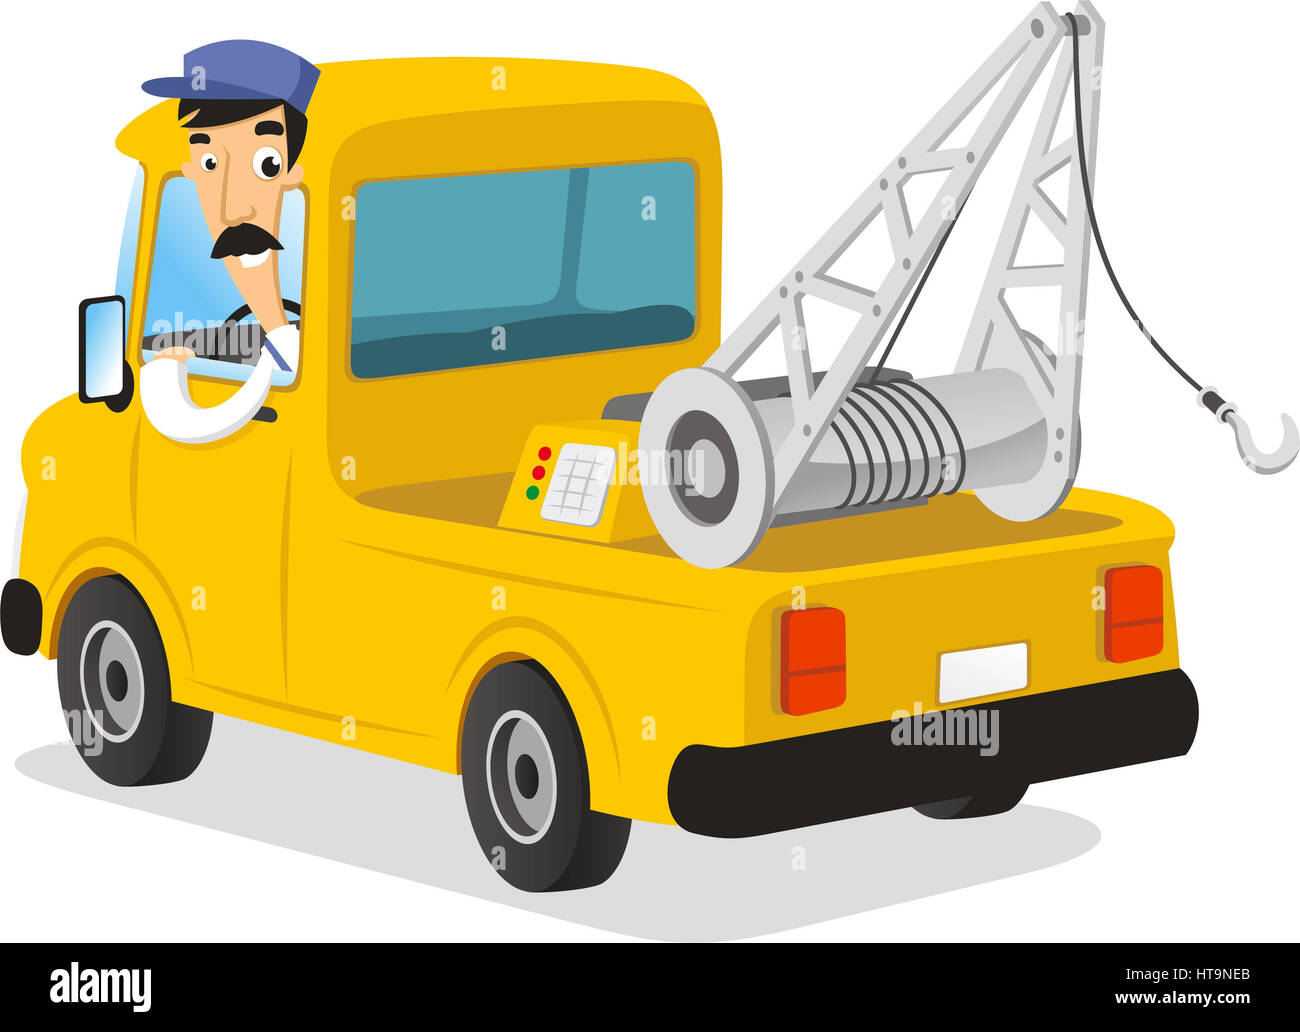 Cartoon Tow Truck High Resolution Stock Photography and Images - Alamy